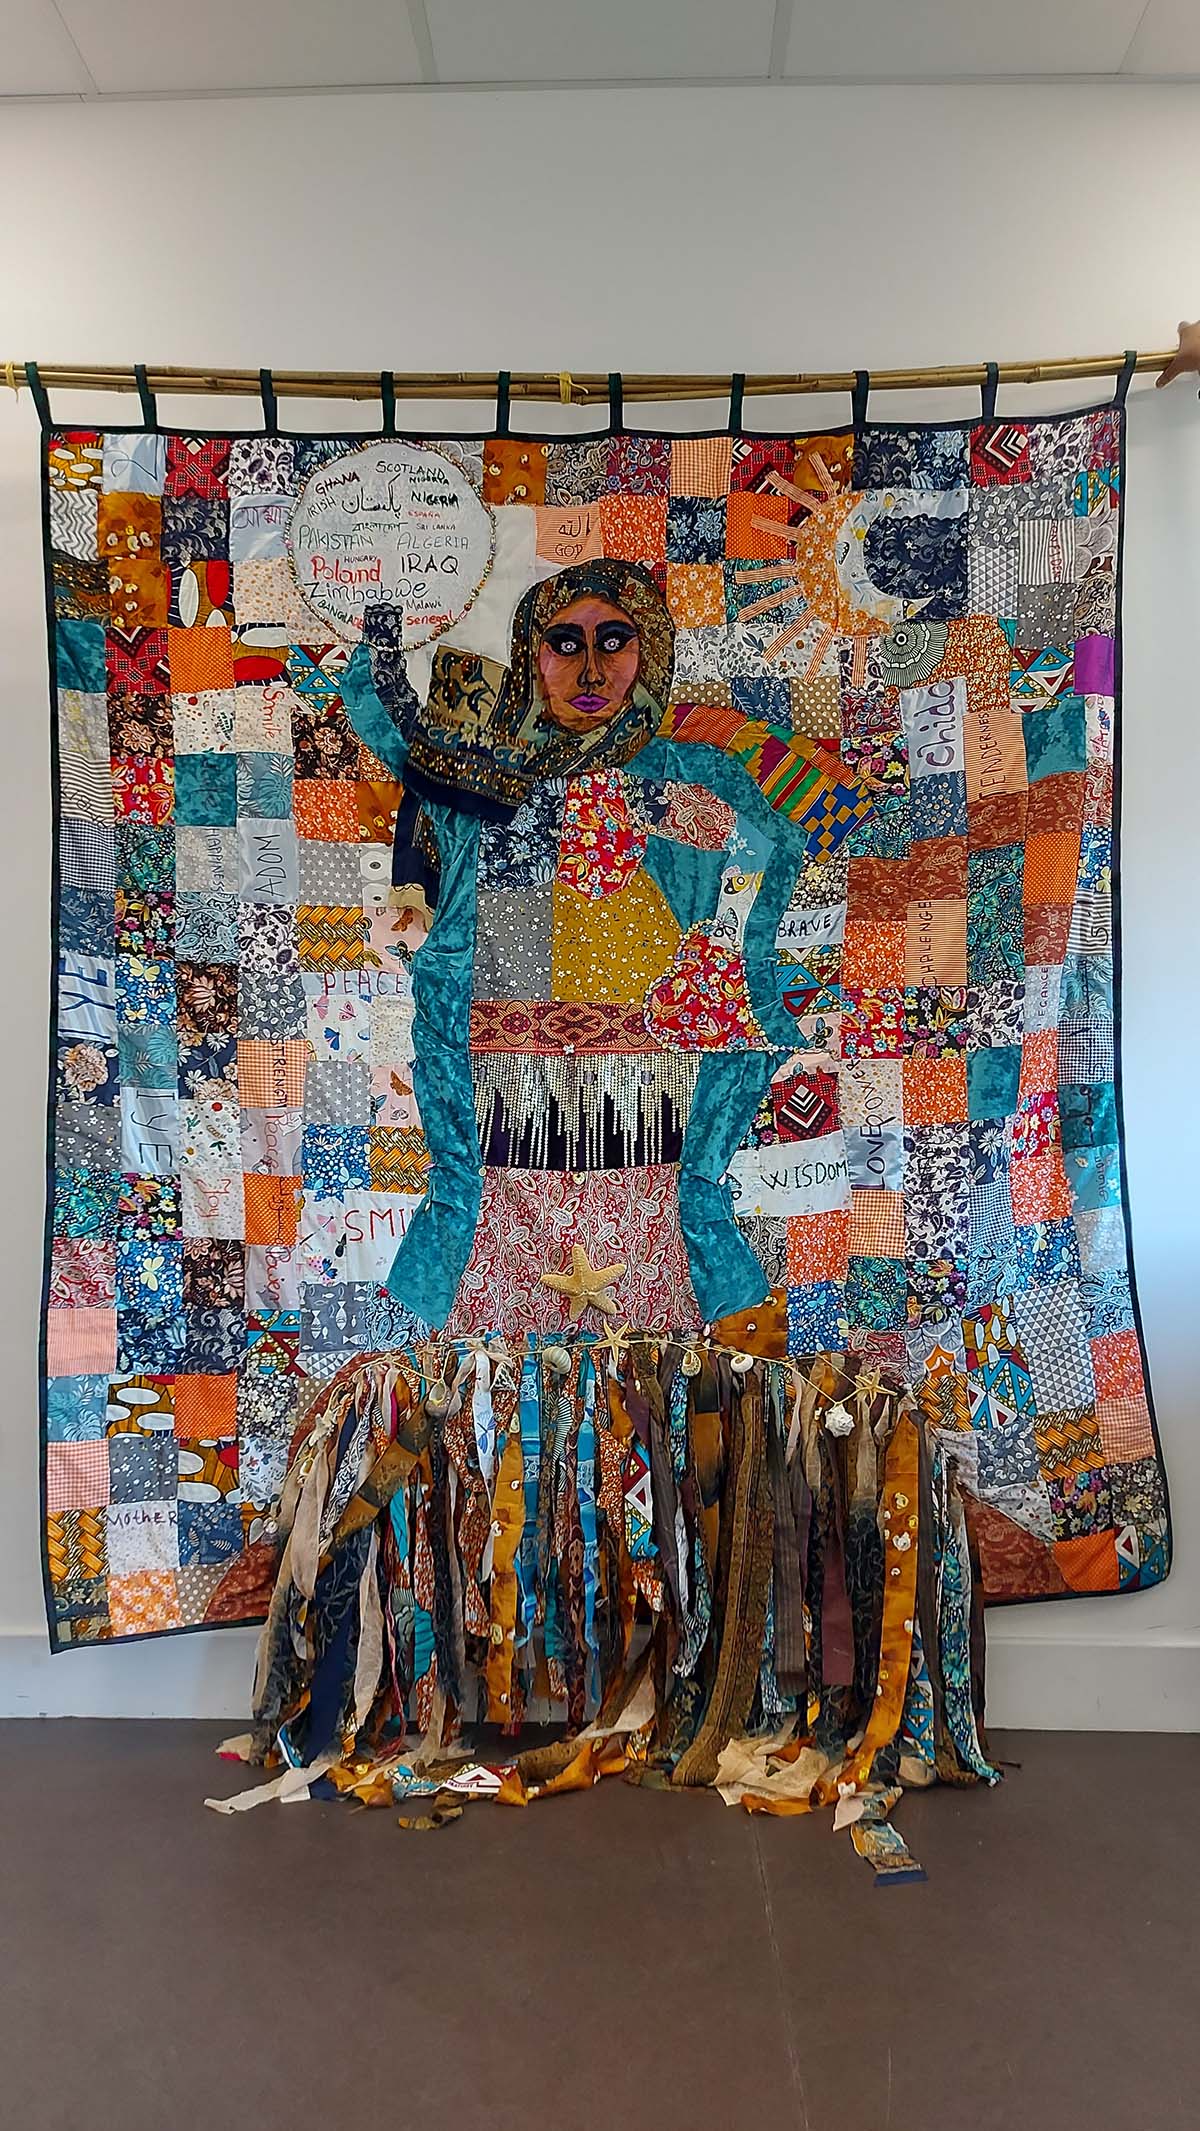 A large tapestry showing a woman made of patchwork squares